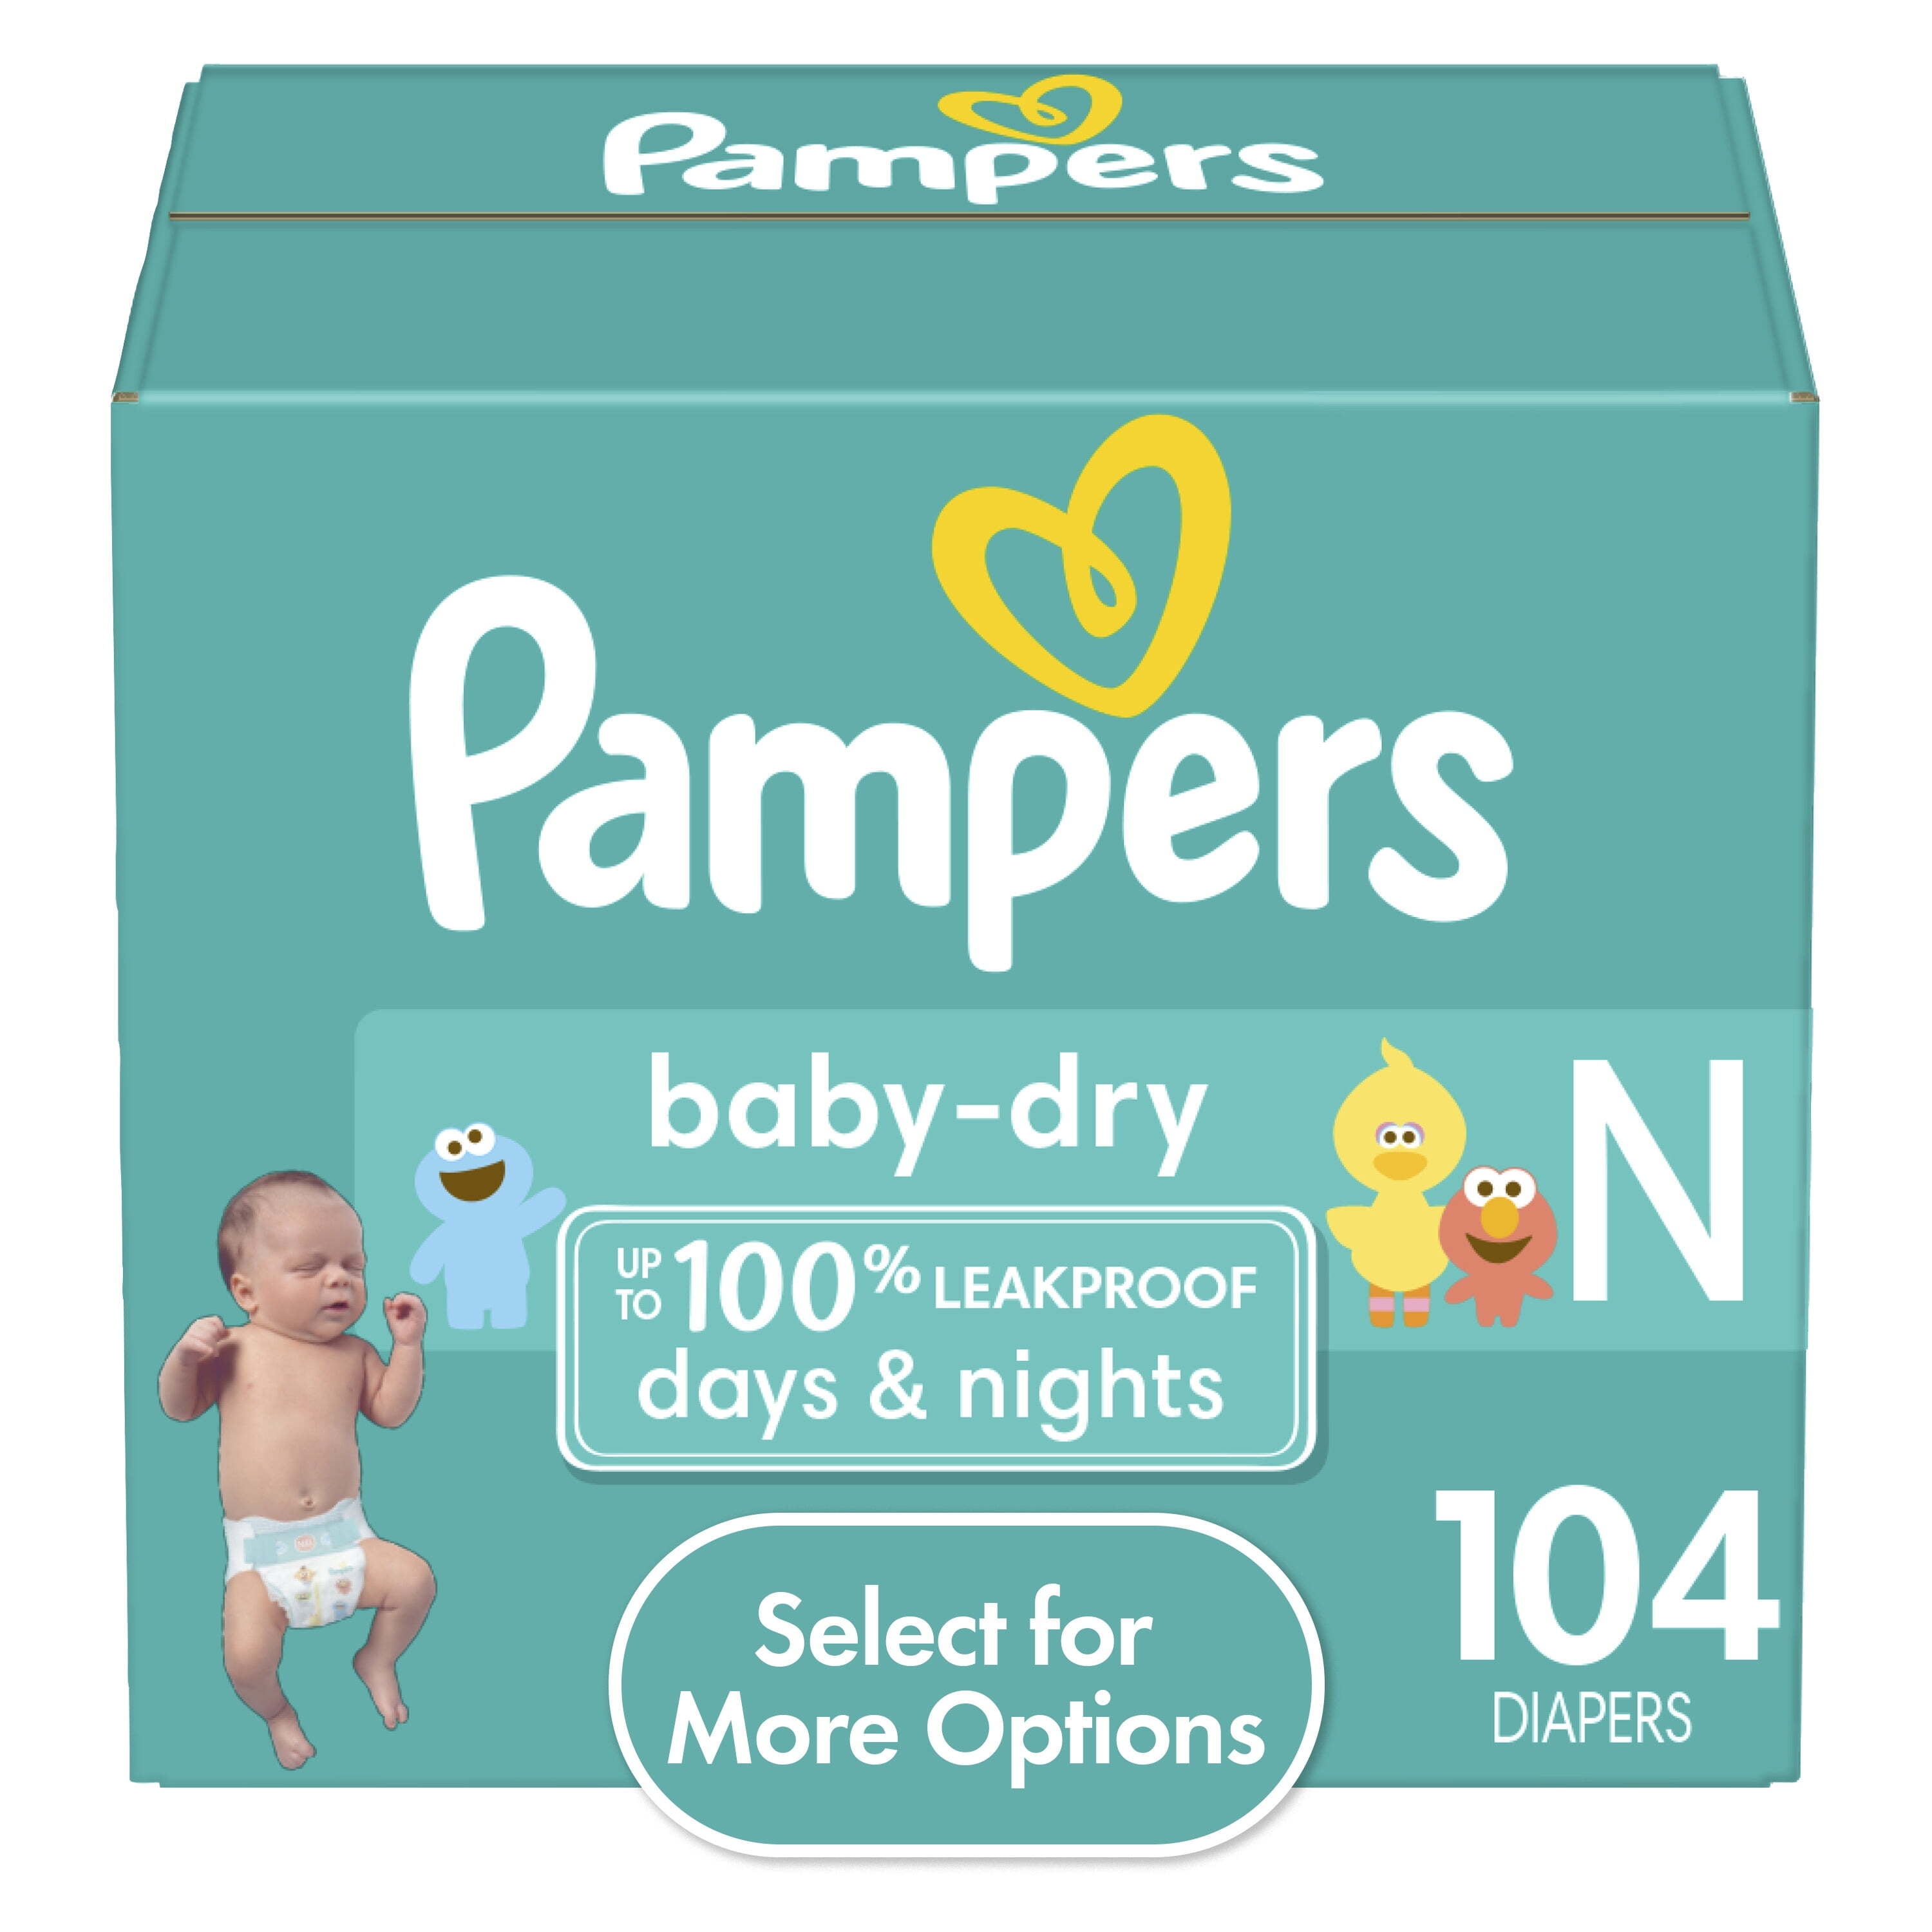 pampers new baby dry 2 giant box